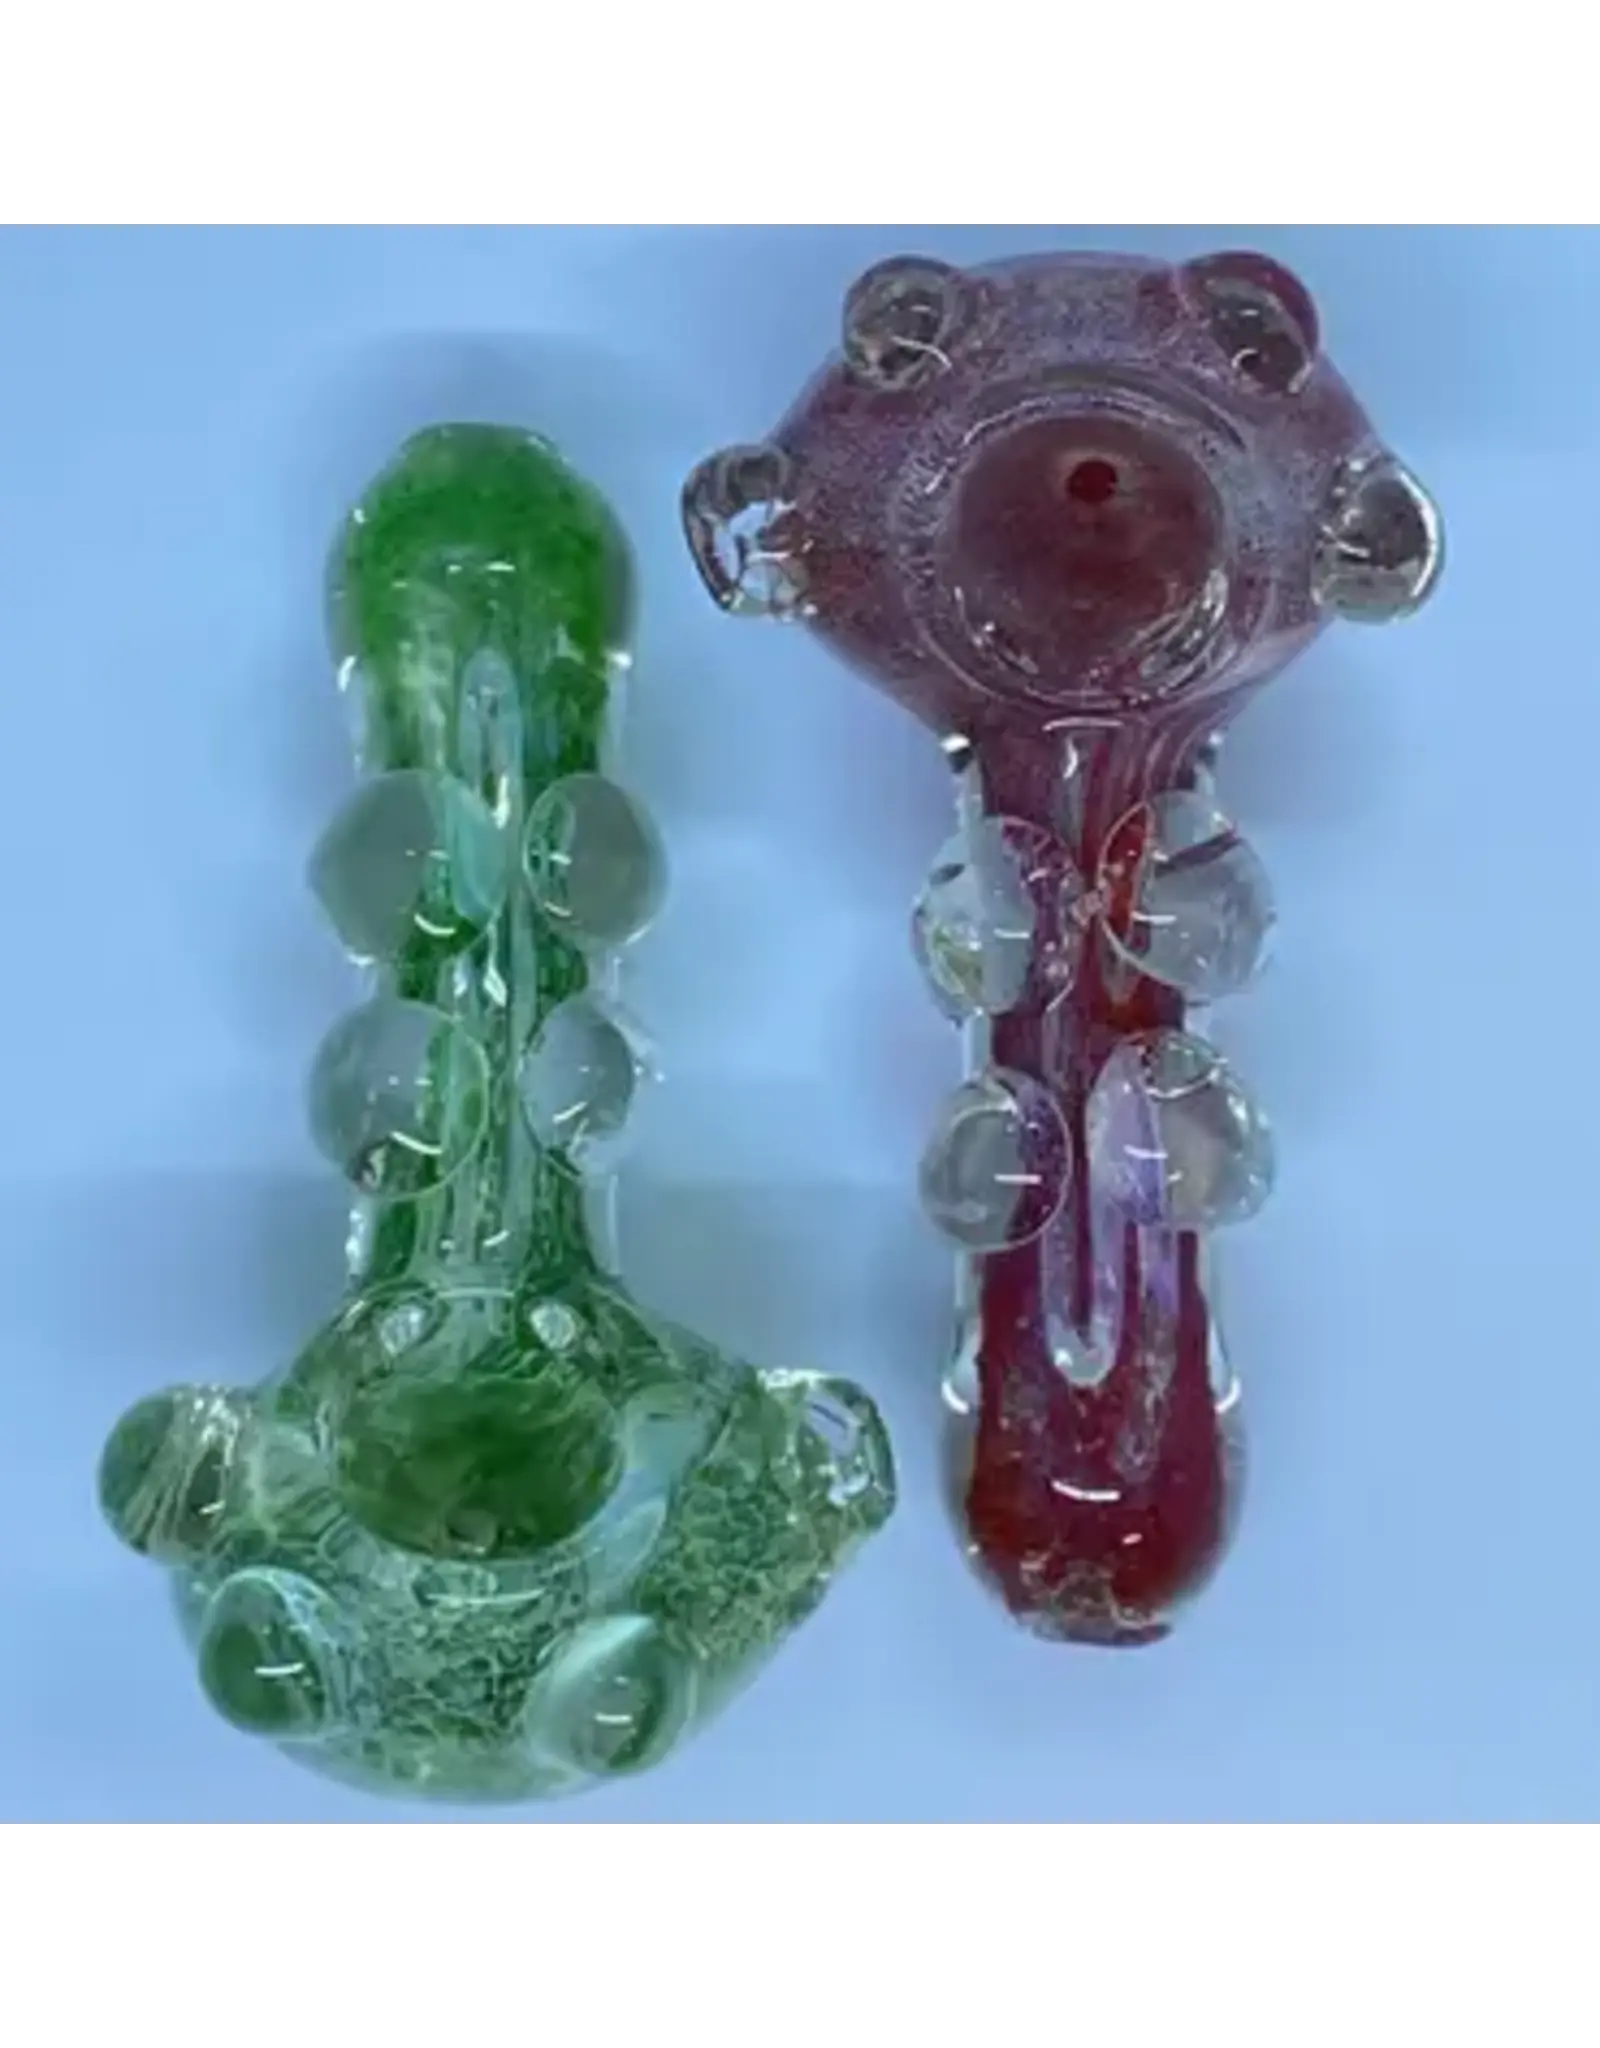 Smokerz Glass SMKZ       4.5" Full Frit Color Line Marbles     C115